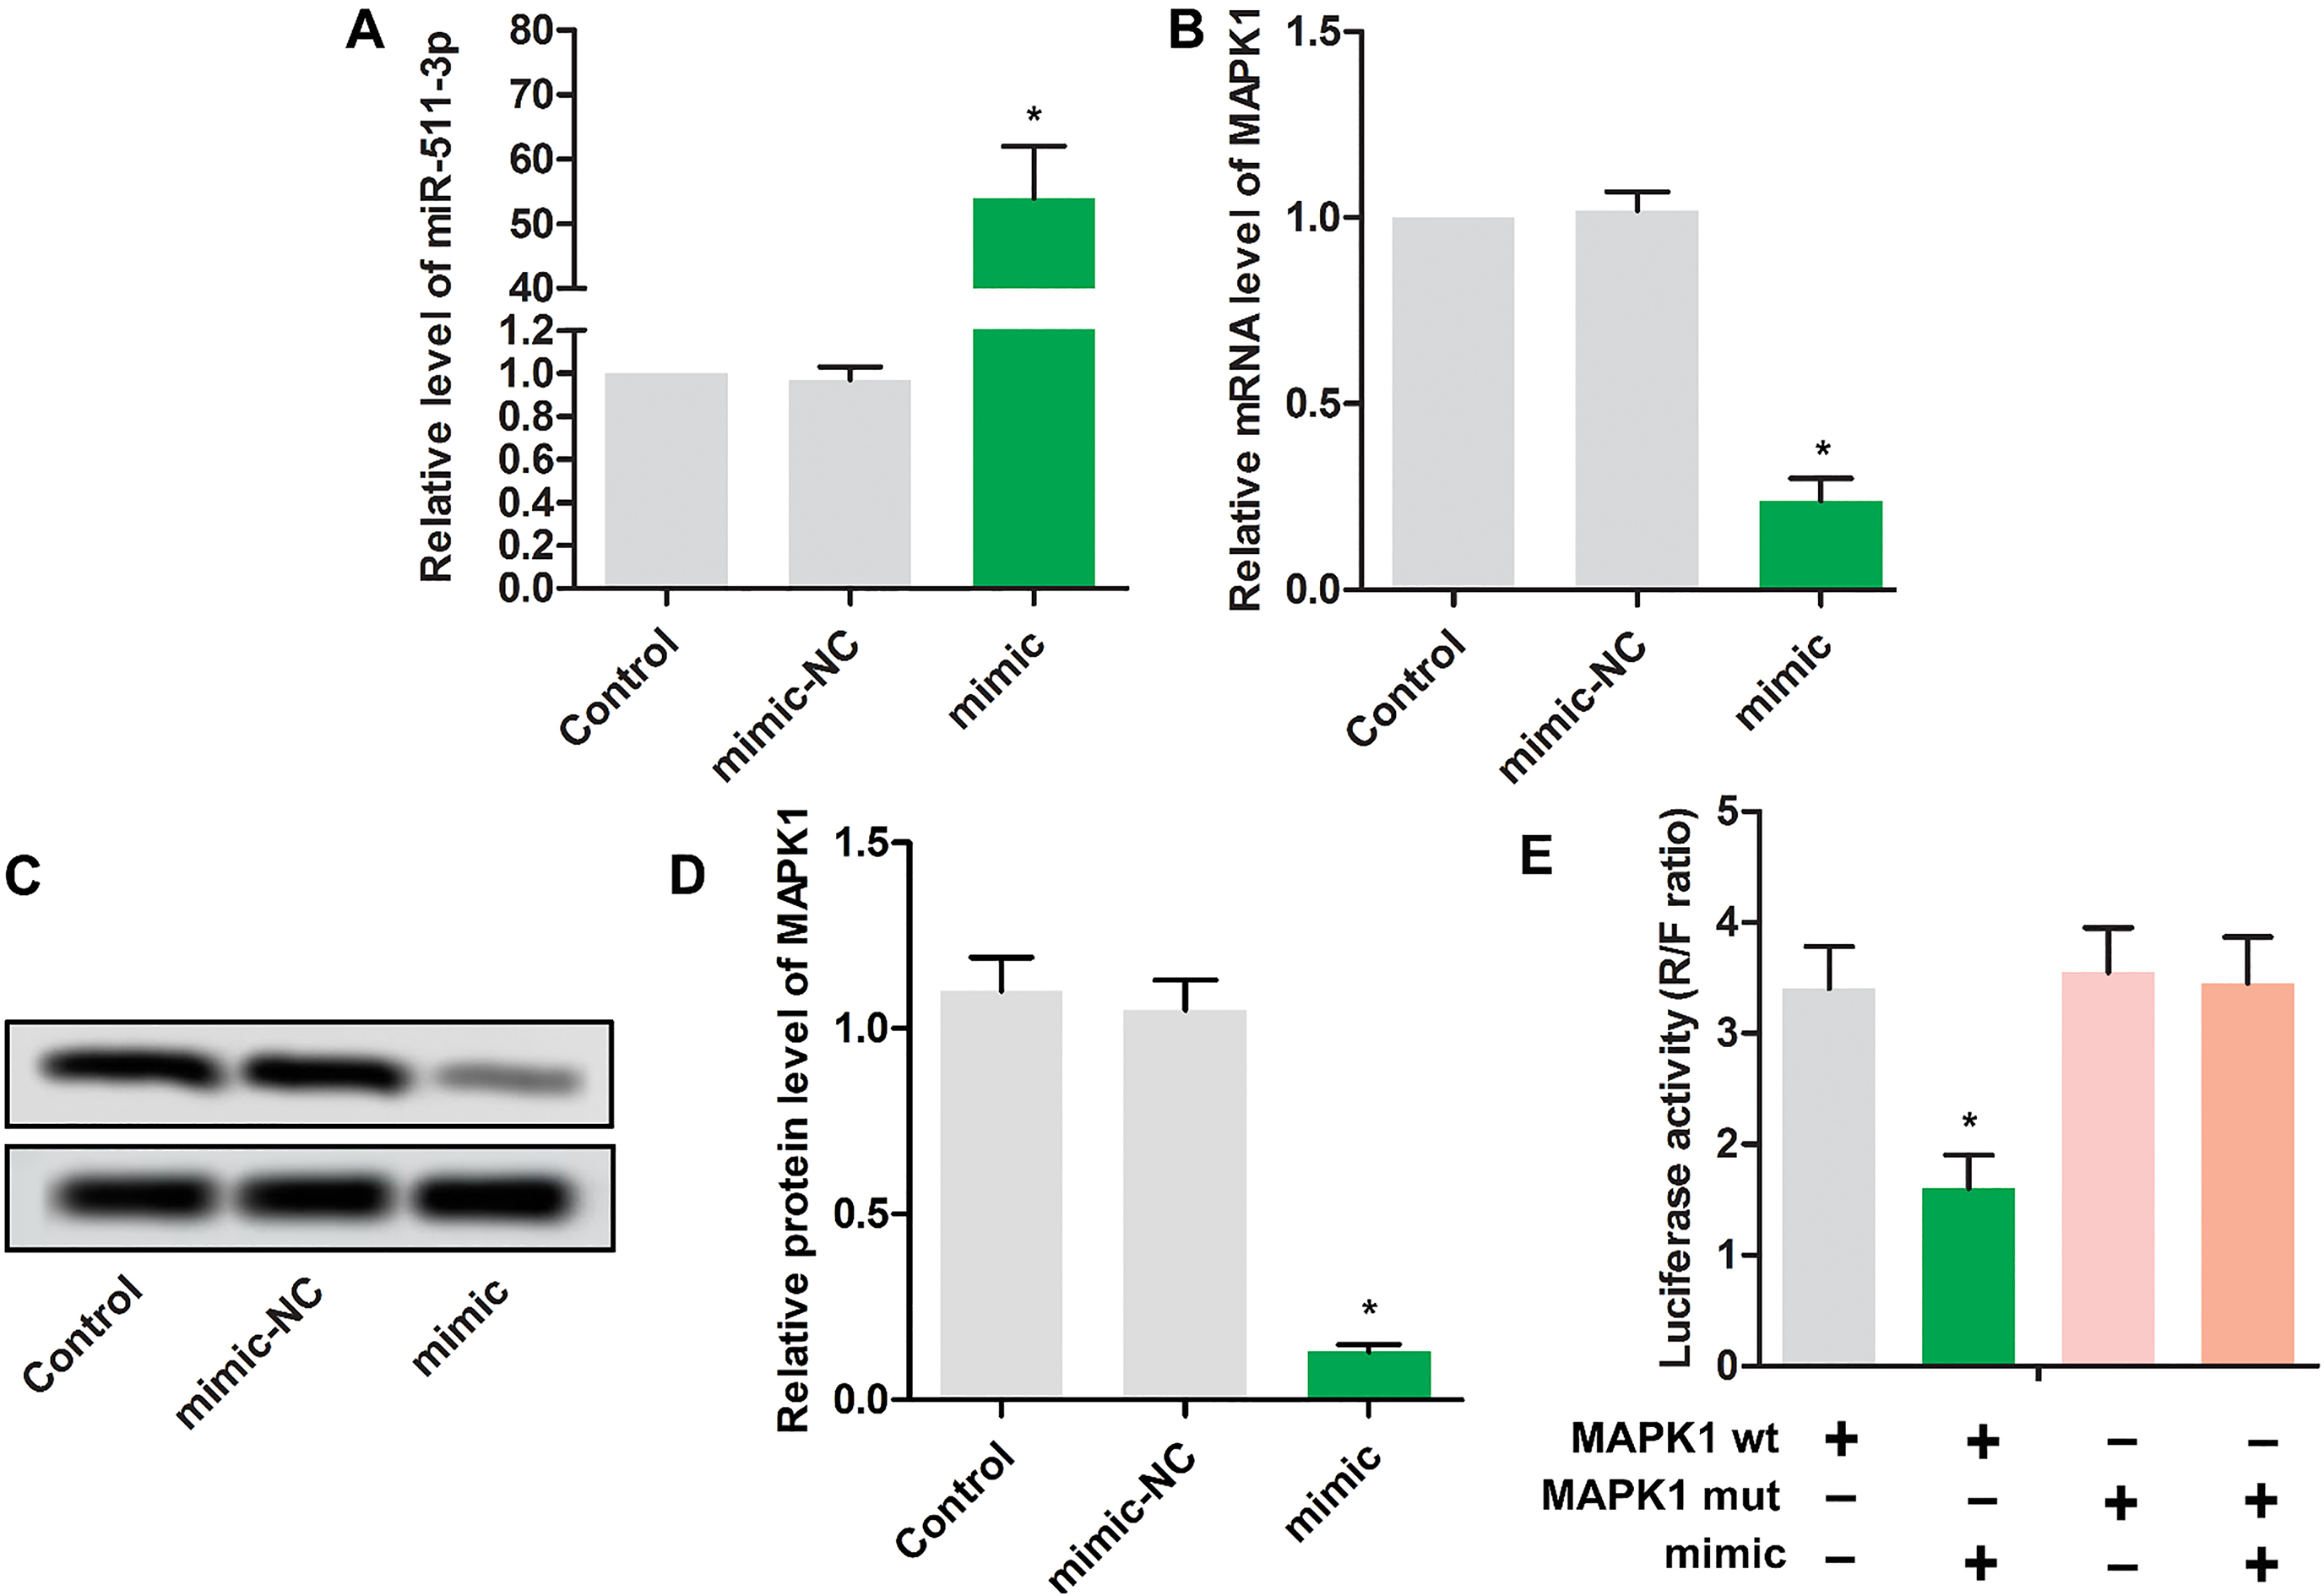 MAPK1 is a target of miR-511. MG63 cells were randomly divided into 3 groups. Control group: normal MG63 cells; mimic NC group: MG63 cells were transfected with scramble mimics; miR-511 mimic group: MG63 cells were transfected with miR-511 mimic; The relative expressions miR-511(A) and MAPK1(B) were detected using RT-PCR in MG63 cells. β-actin was used as internal control. The experiments were repeated at least 3 times, and error bars represent ± SD (P∗< 0.05 versus Control group). (C) The luciferase activity was detected in MG63 cells transfected with mimic control, mimic, miR-511 wt and miR-511 mut. The experiments were repeated at least 3 times, and error bars represent ± SD (P∗< 0.05 versus the other 3 groups). 